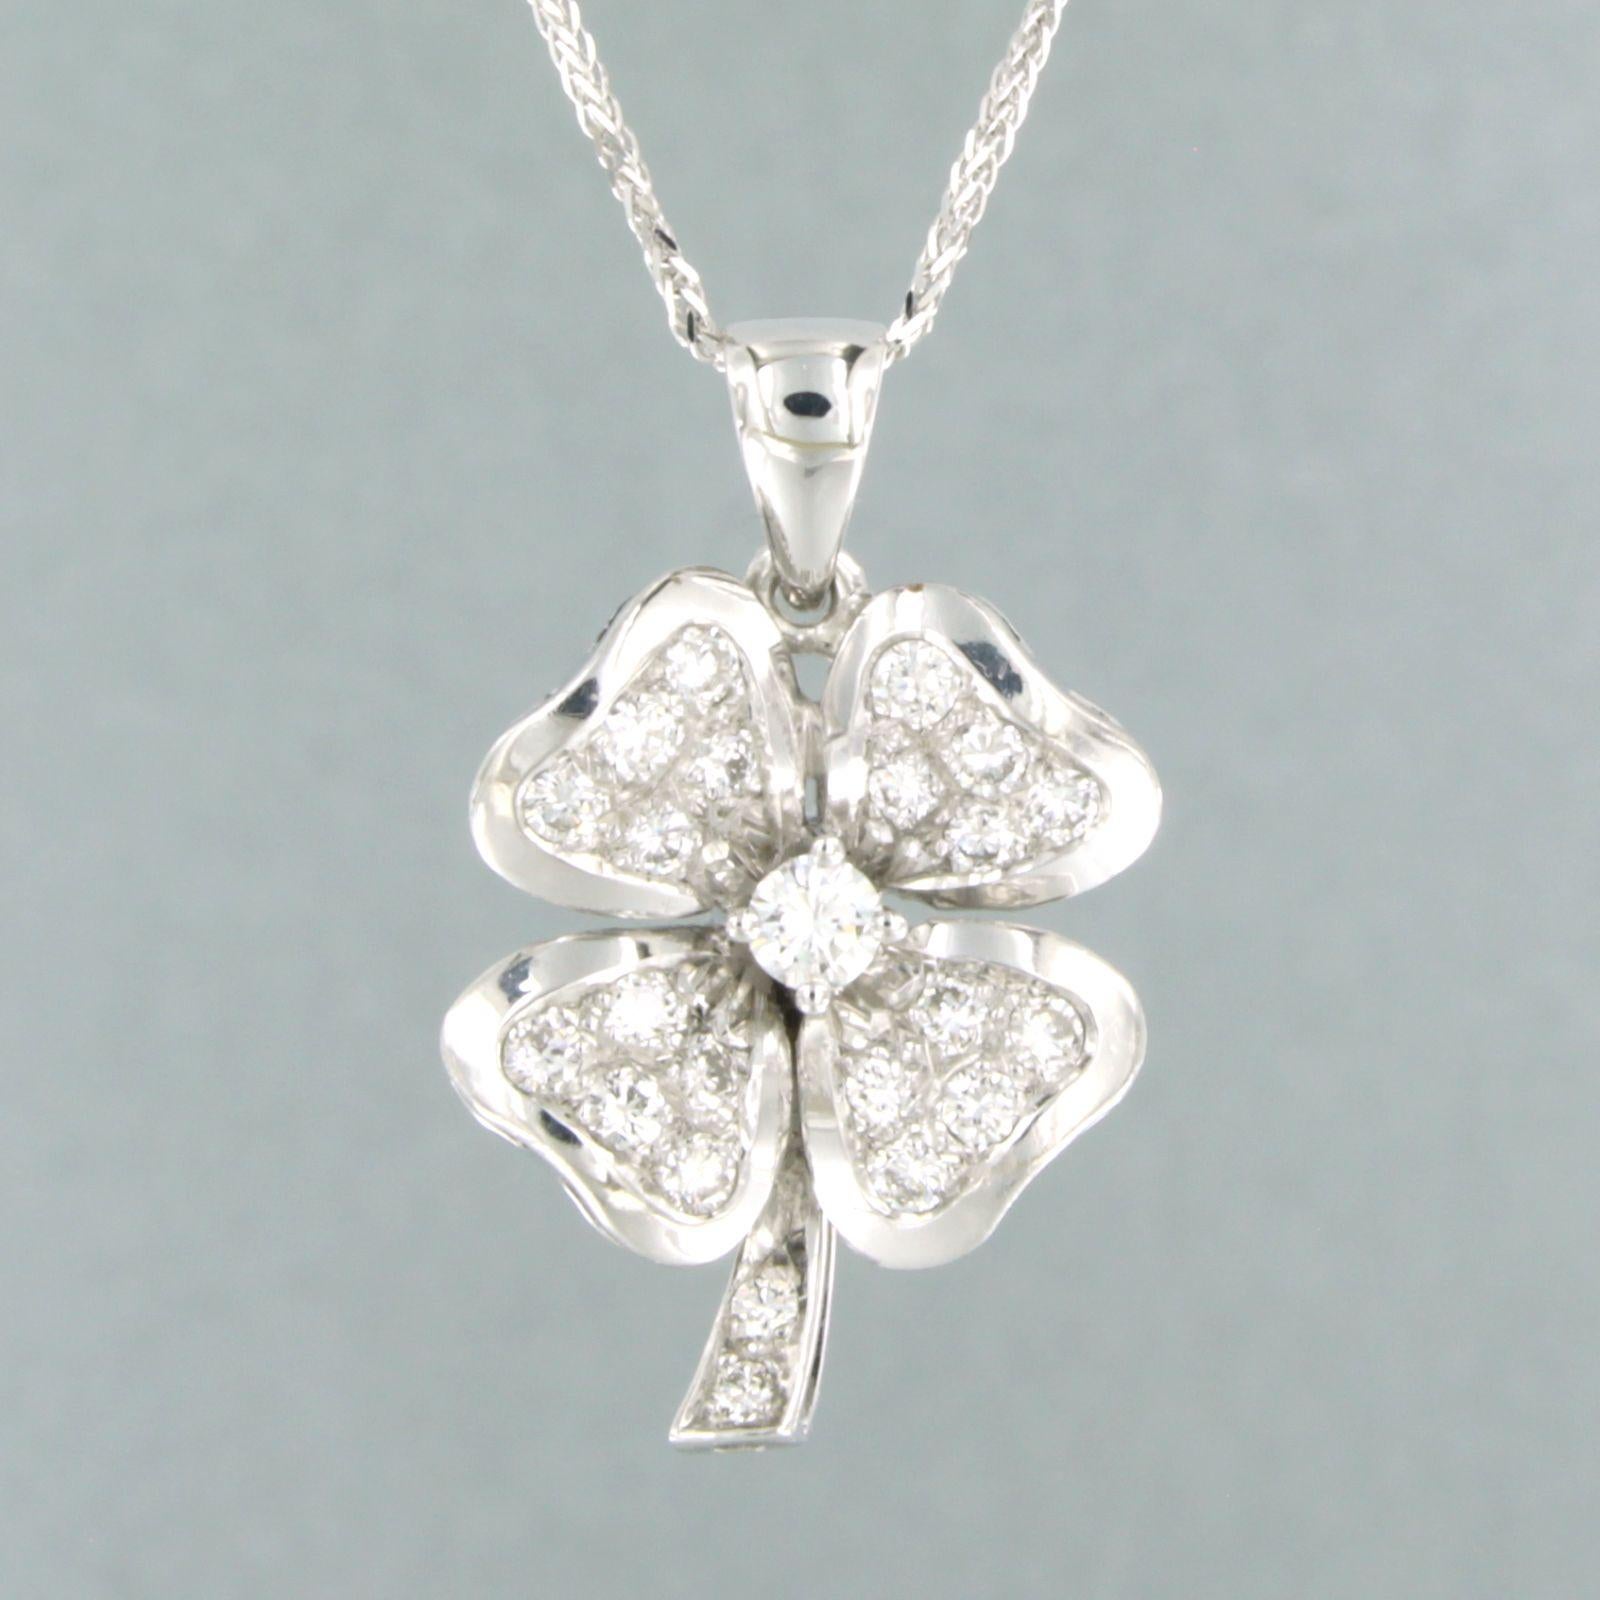 Modern Necklace and pendant st with diamonds 14k and 18k white gold For Sale